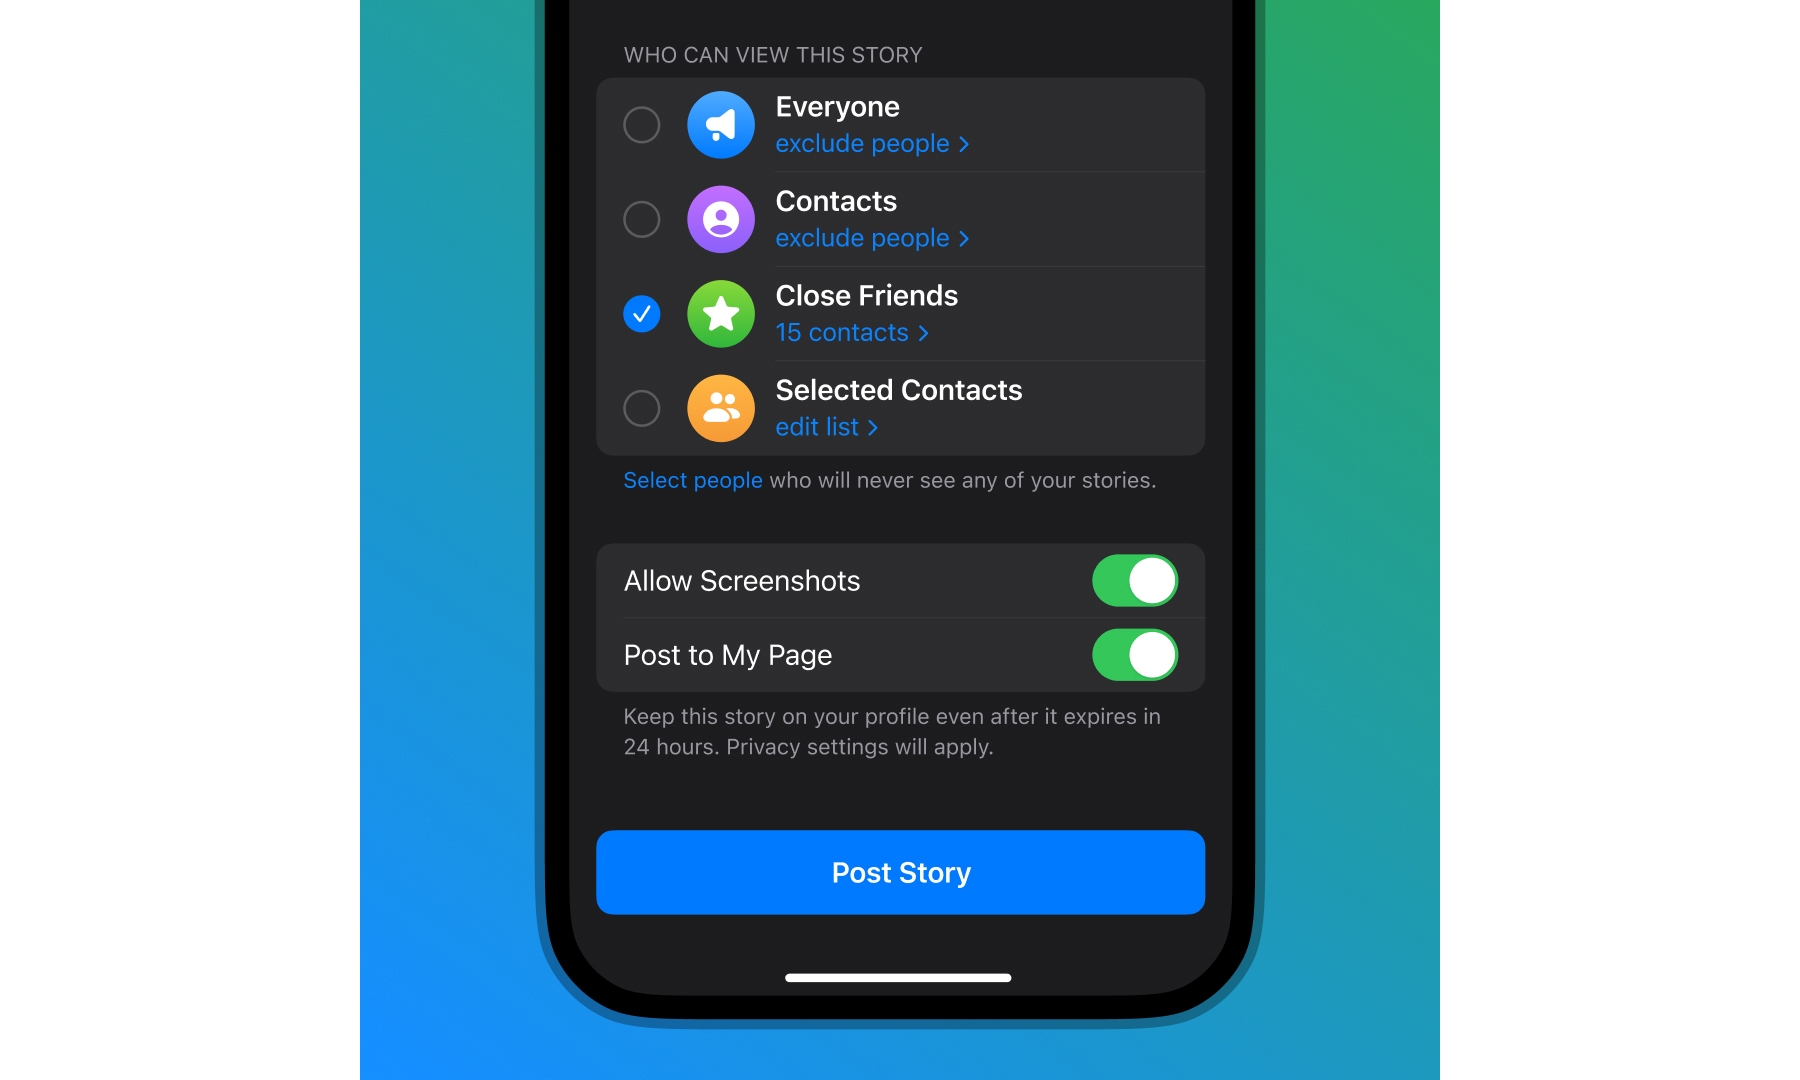 Marketing screenshot showing privacy controls for Telegram Stories. A phone's screen displays visibility options (everyone, contacts, close friends or selected contacts). It also has toggles for whether screenshots are allowed and if it's posted to your page. A blue